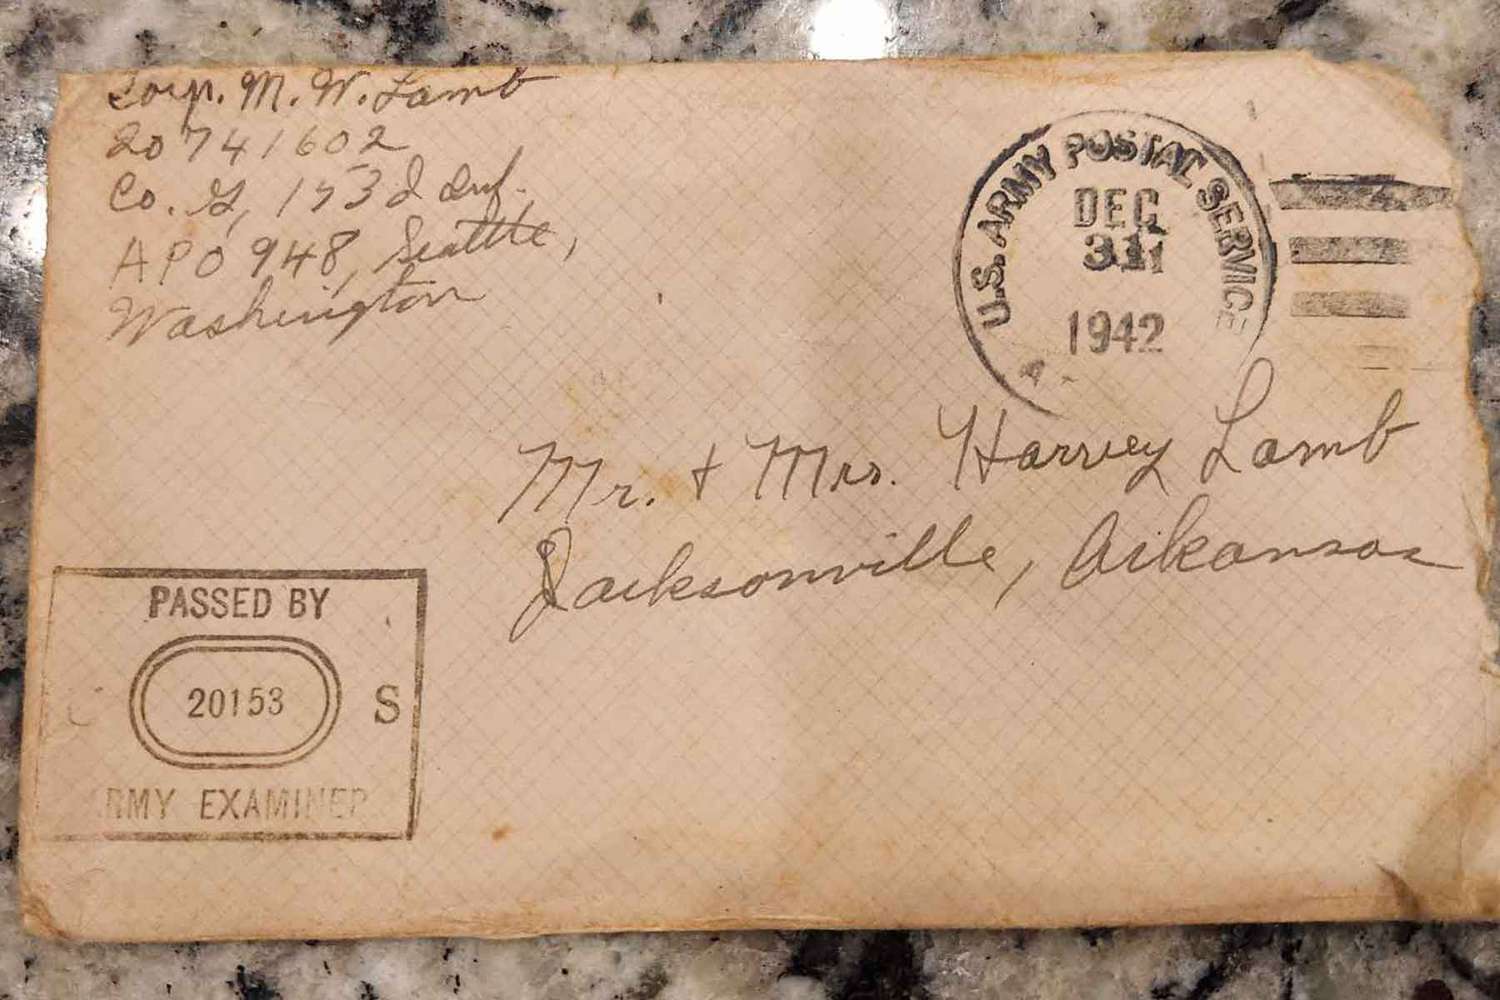 Texas Mailman Drives 5 Hours On His Day Off To Deliver Lost WWII Letters To Arkansas Family